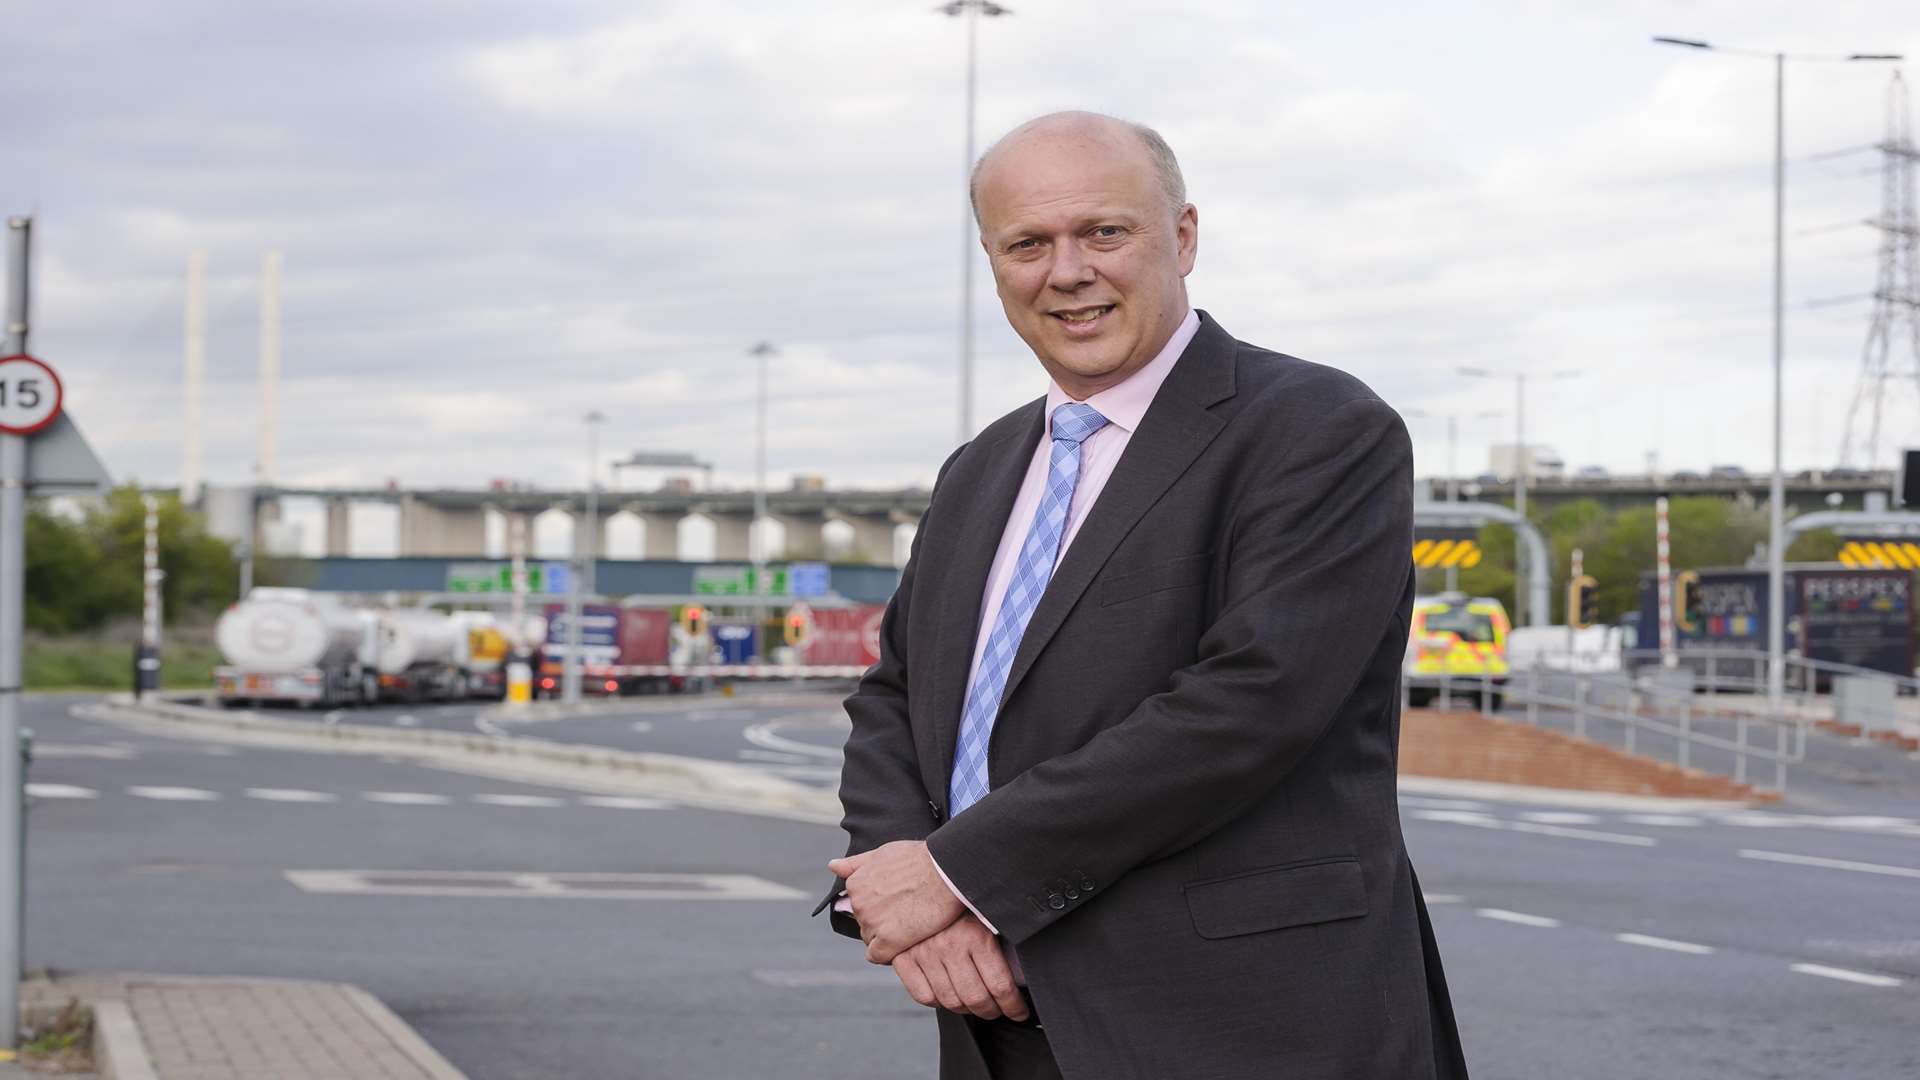 Transport Secretary Chris Grayling at the Dartford Crossing to announce the government's decision on the Lower Thames Crossing - Option C, the tunnel east of Gravesend